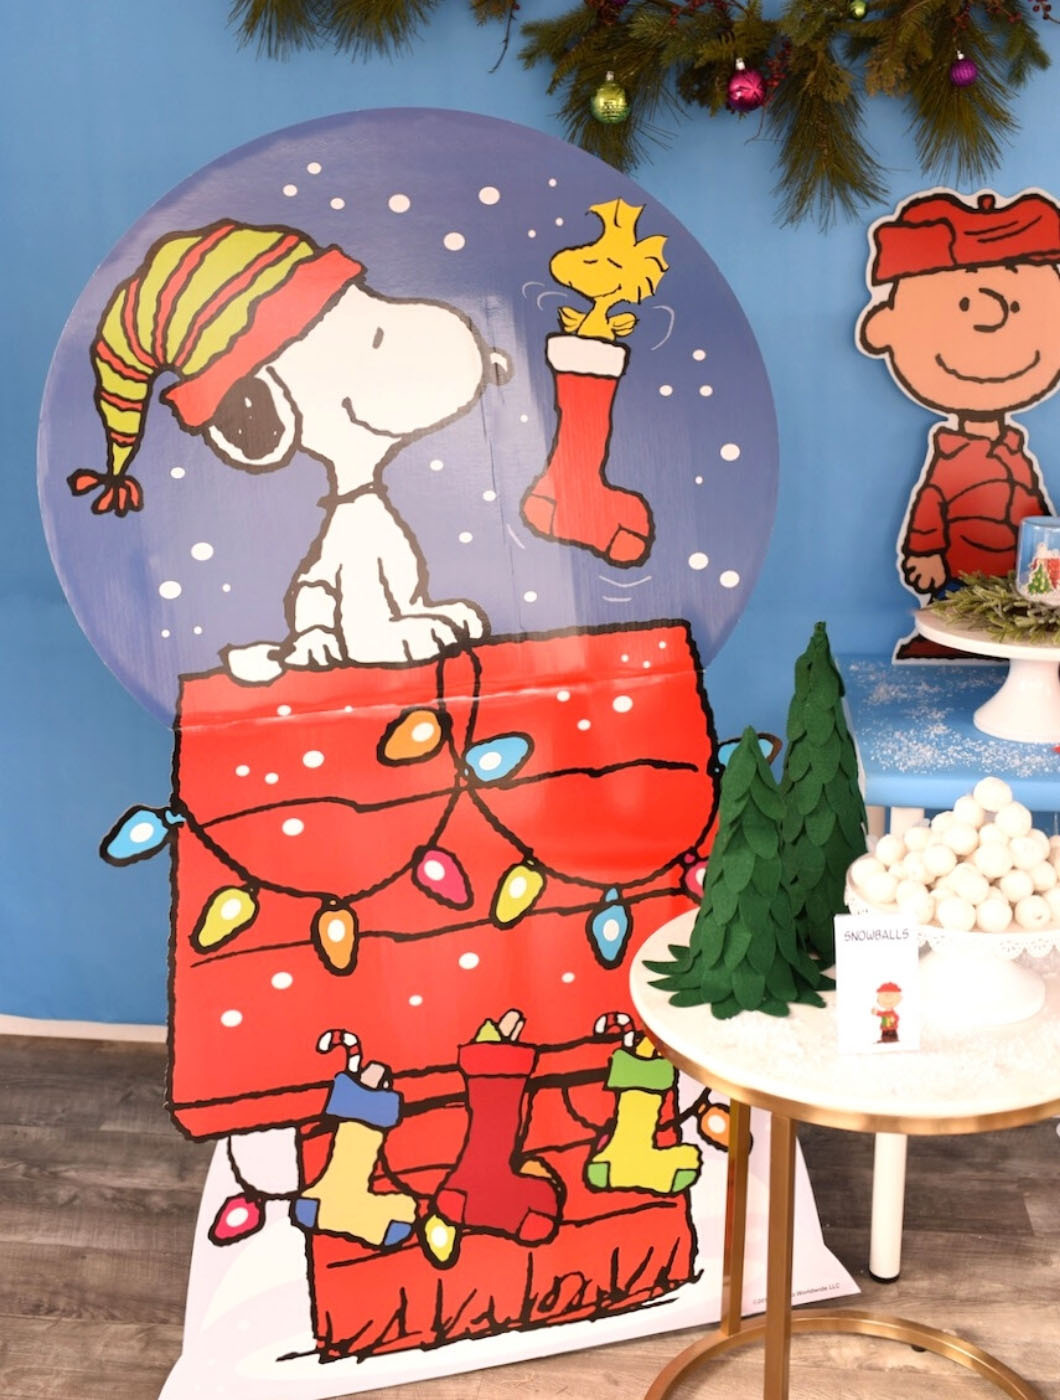 58 HQ Images Charlie Brown Christmas Decor : Charlie Brown Christmas 24 Crafts Recipes Activities For Kids Mommy S Bundle